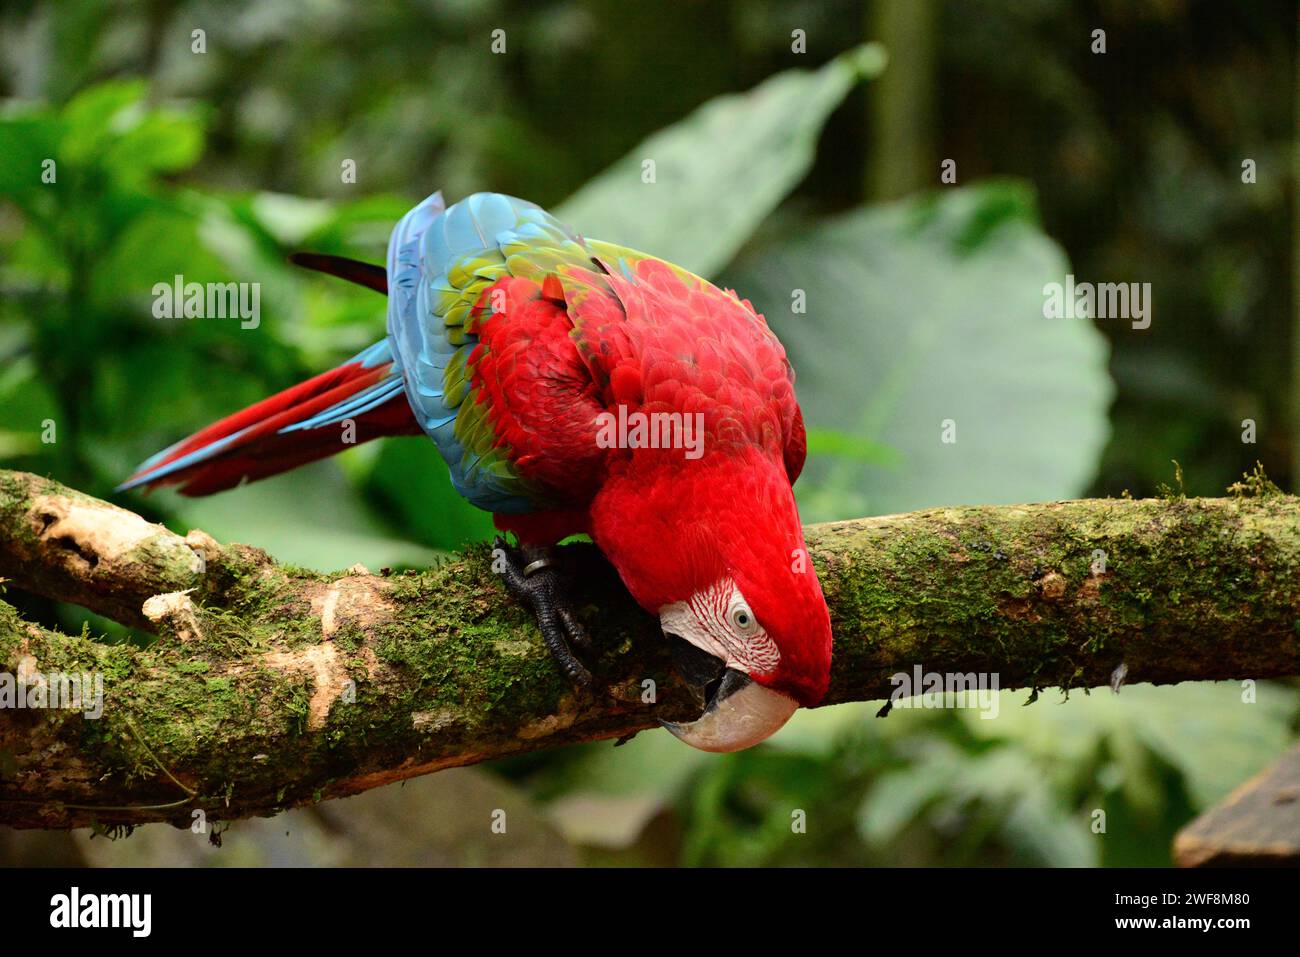 Red-and-green macaw (Ara chloropterus) is a parrot native to tropical South America. This photo was taken in Brazil. Stock Photo